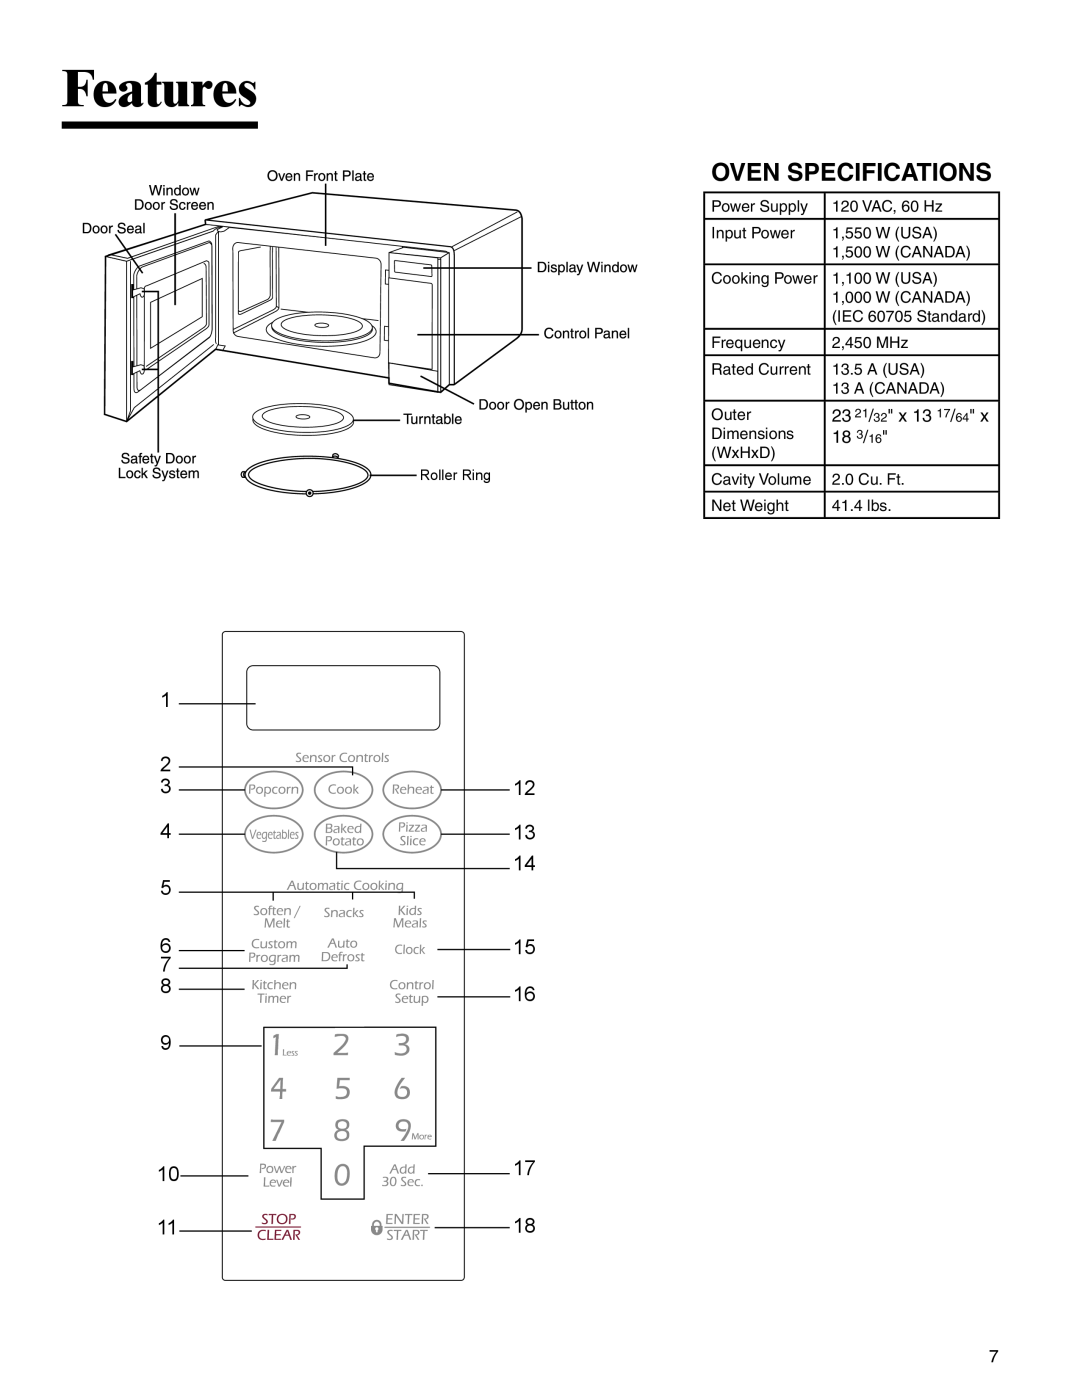 Maytag UMC5200BAB/W/S, UMC5200 BAB/W/S, UMC5200BCB/W/S, UMC5200 BCB/W/S Features, Oven Specifications 